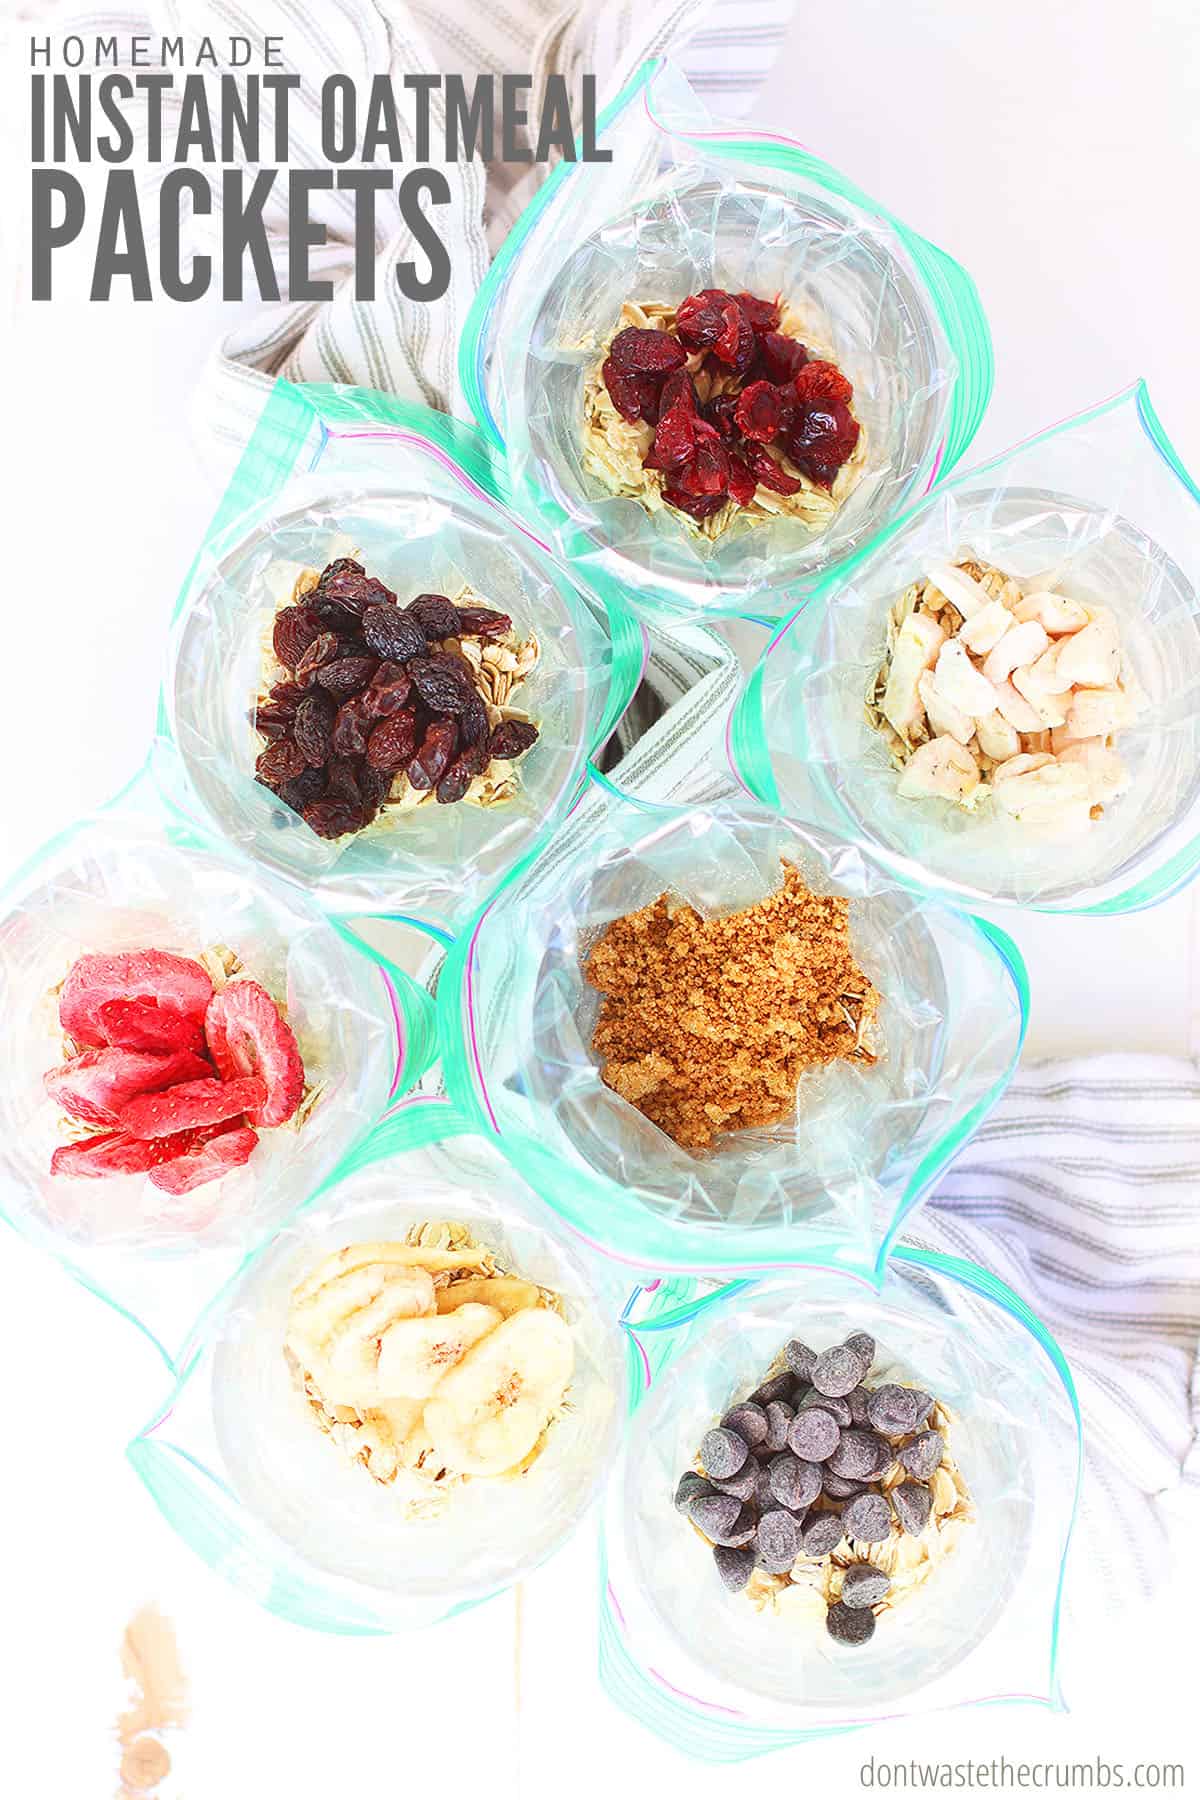 The ultimate guide to homemade instant oatmeal packets - tricks, flavors, packing ideas & ways to involve the kids for a quick and easy healthy breakfast!